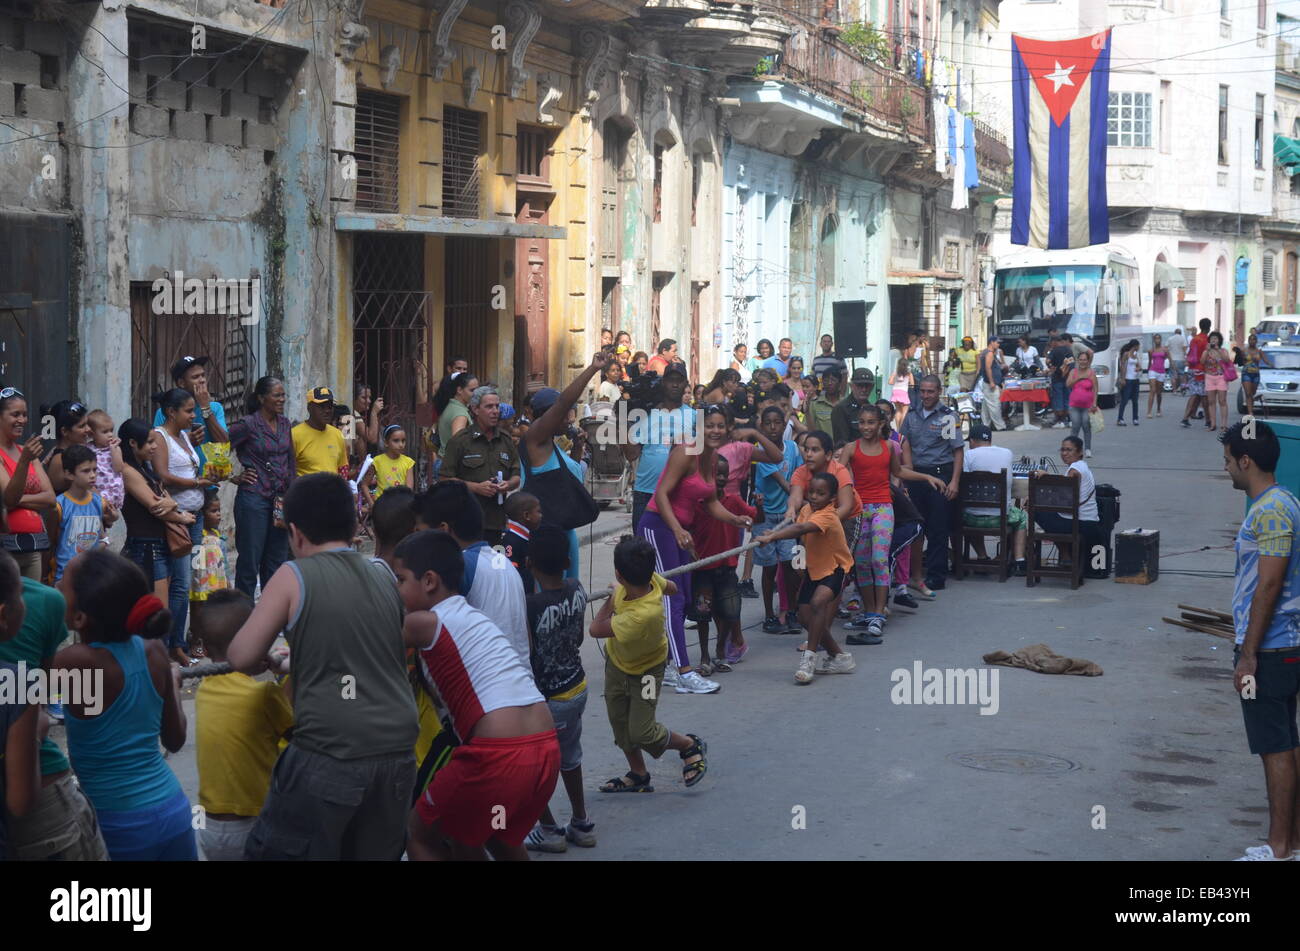 School children taking part in a sports day / tug-o-war contest on the streets of Centro Havana, Cuba Stock Photo